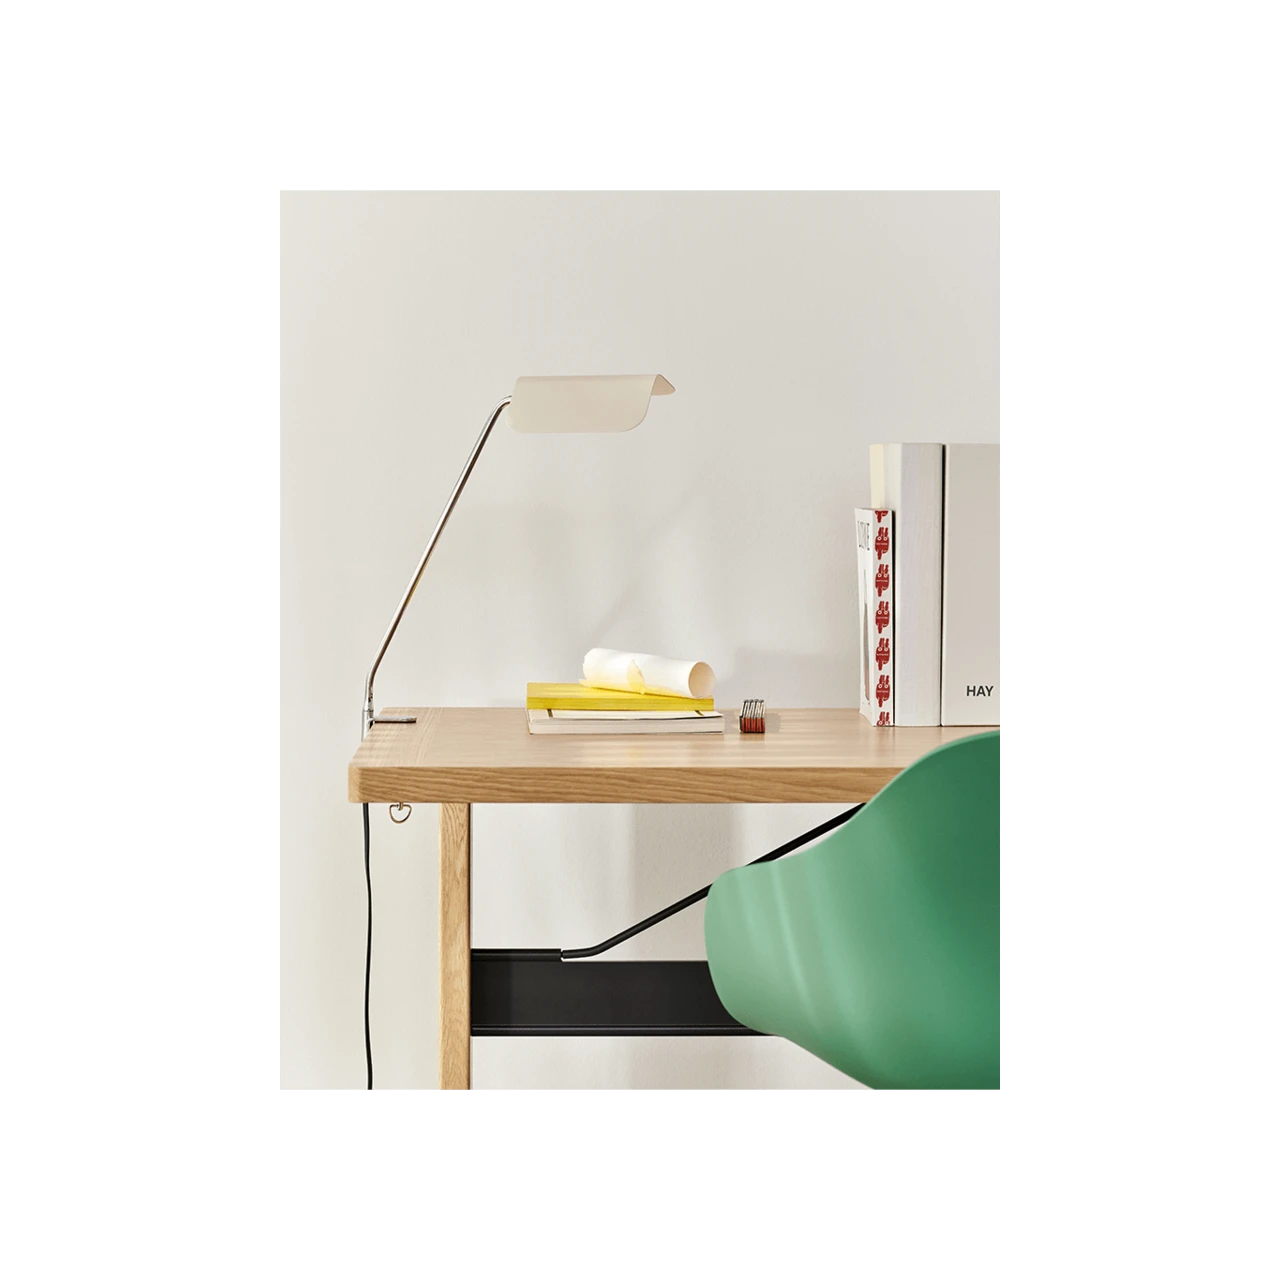 APEX DESK Table lamp By Hay